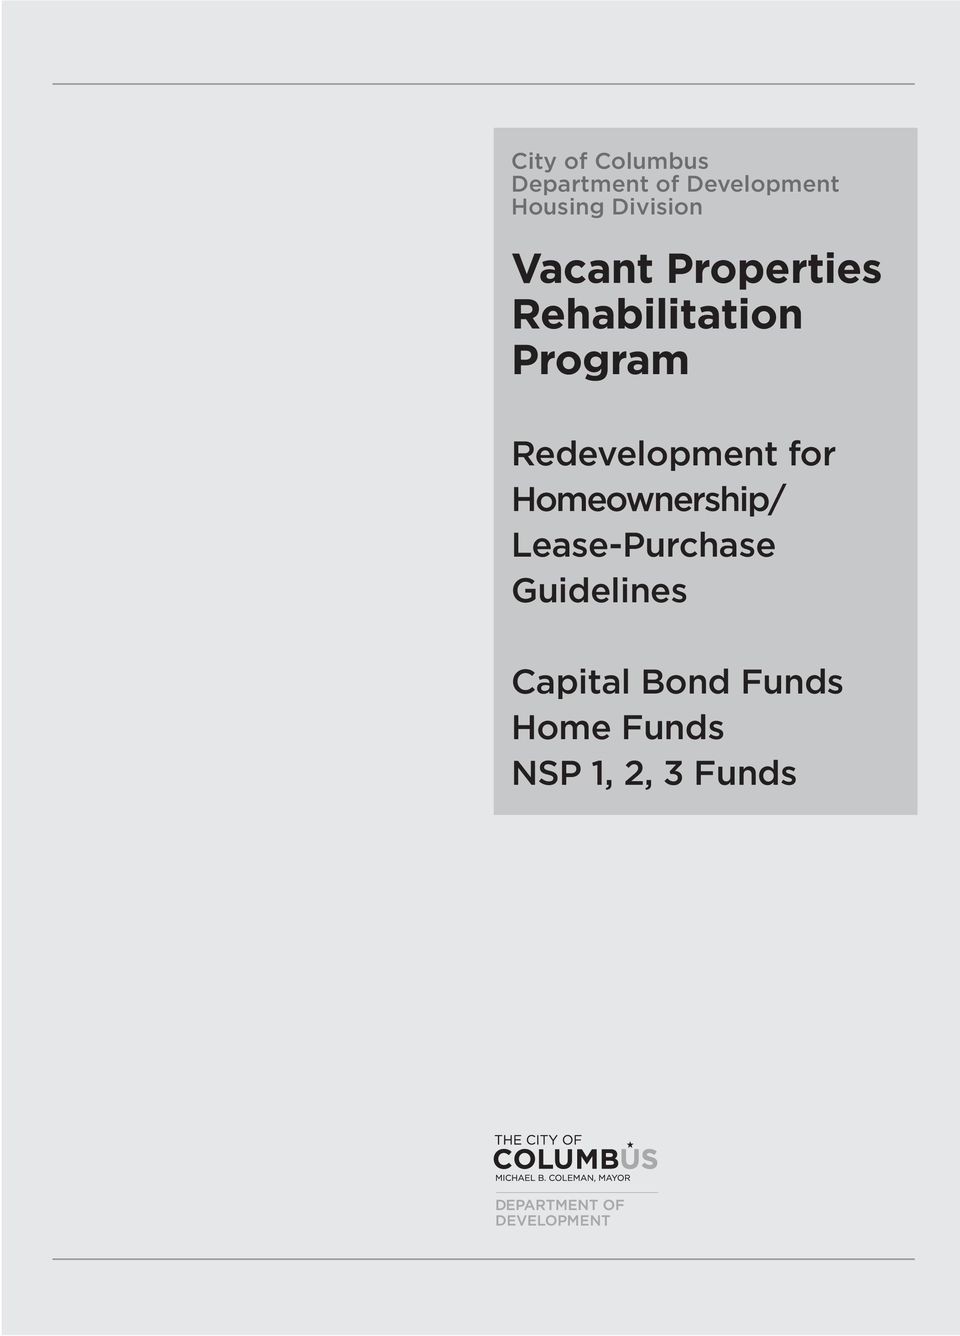 Redevelopment for Homeownership/ Lease-Purchase